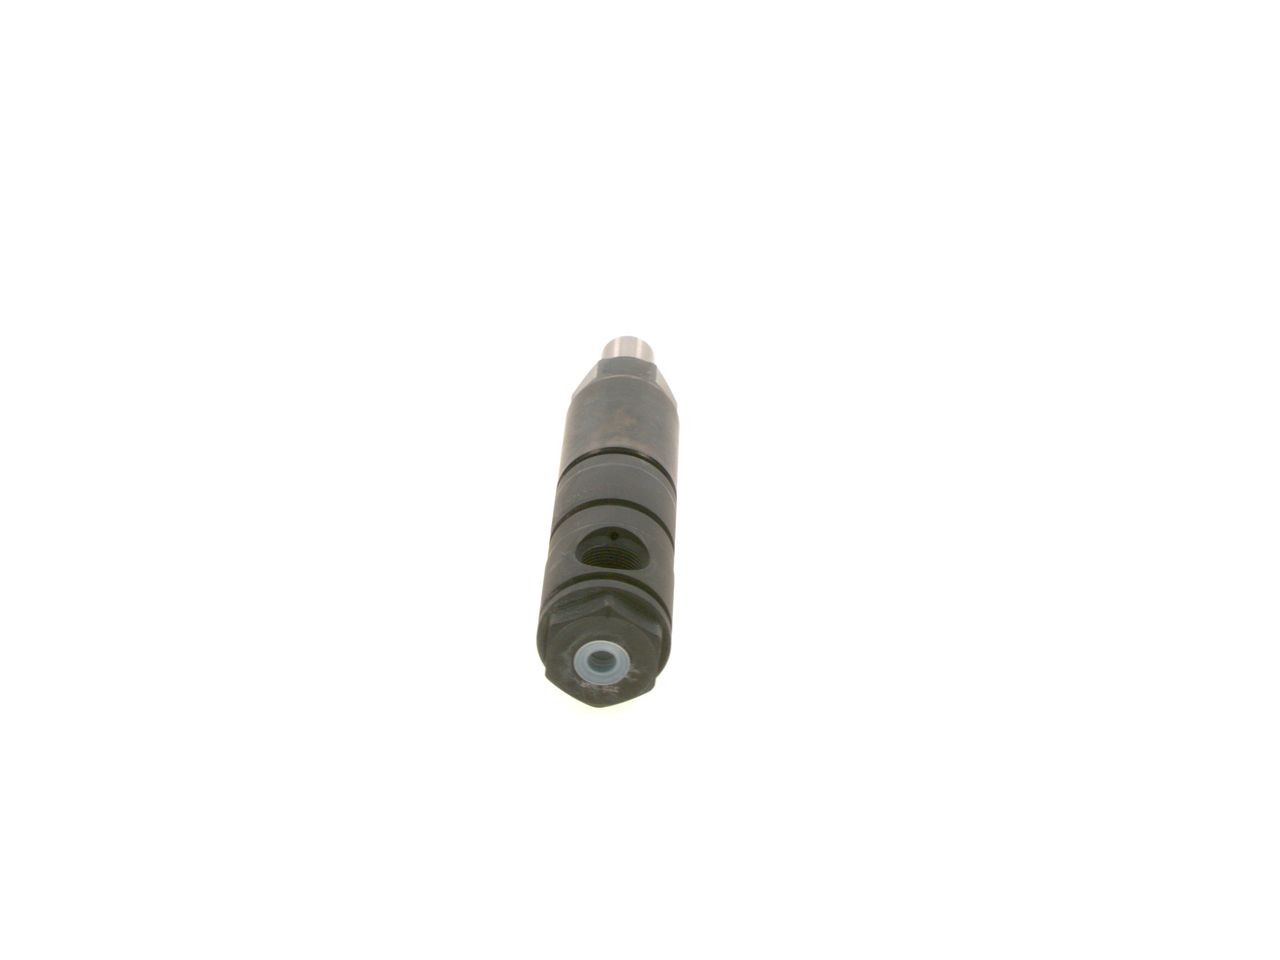 BOSCH 0432490006 Nozzle and Holder Assembly